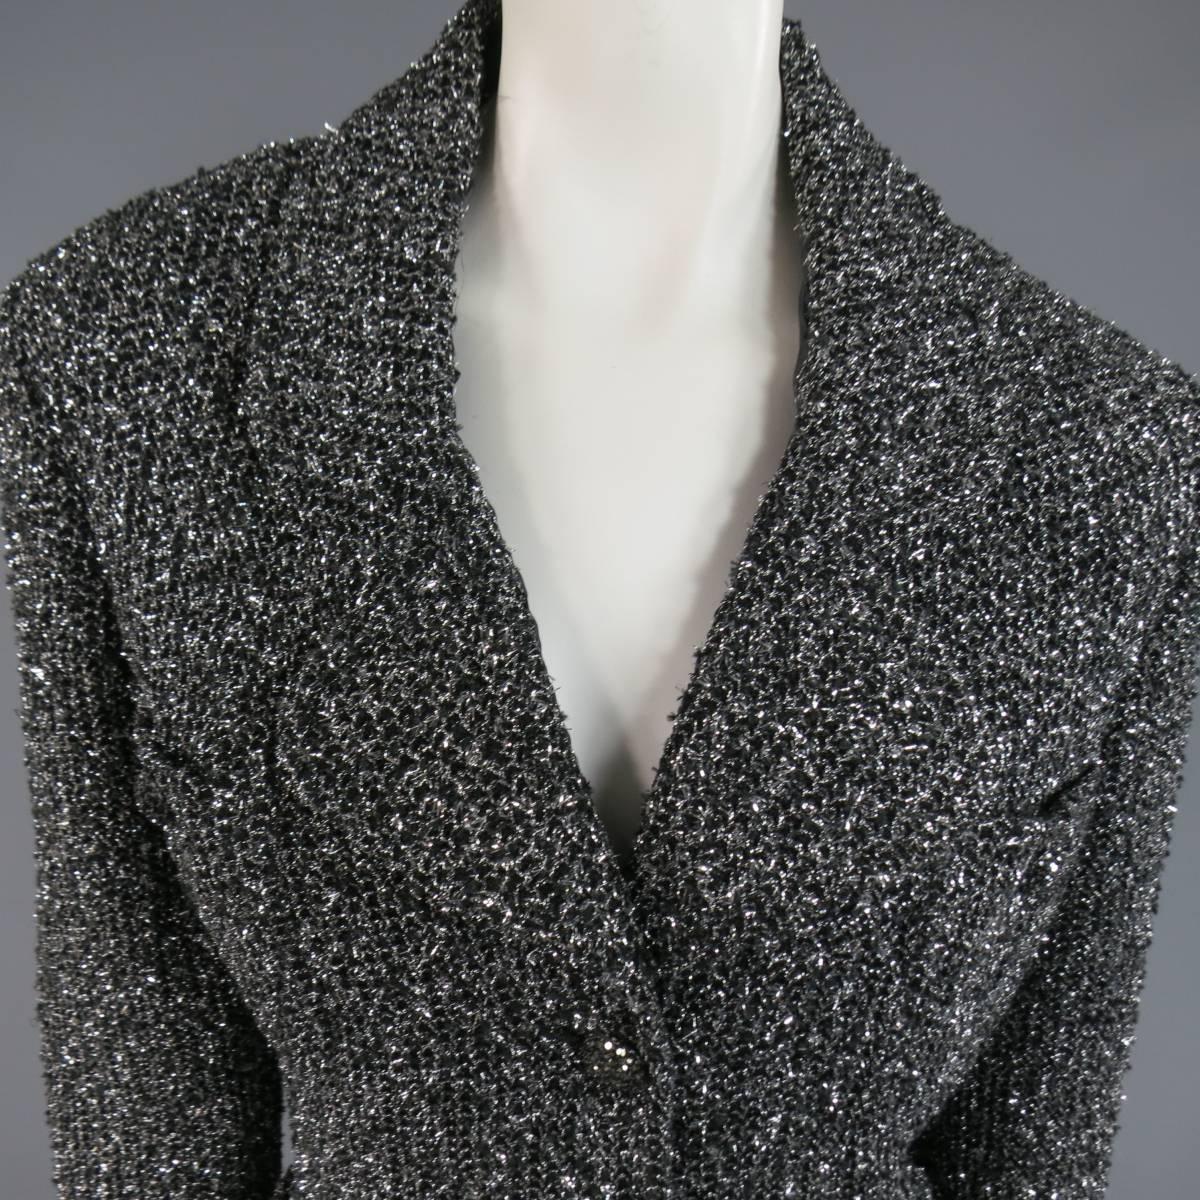 This gorgeous ST. JOHN CAVIAR statement jacket comes in black and silver metallic sparkle textured knit and features a rounded lapel, four patch pockets with gunmetal crystal embellished buttons, three button closure, and satin lining. Small tear in